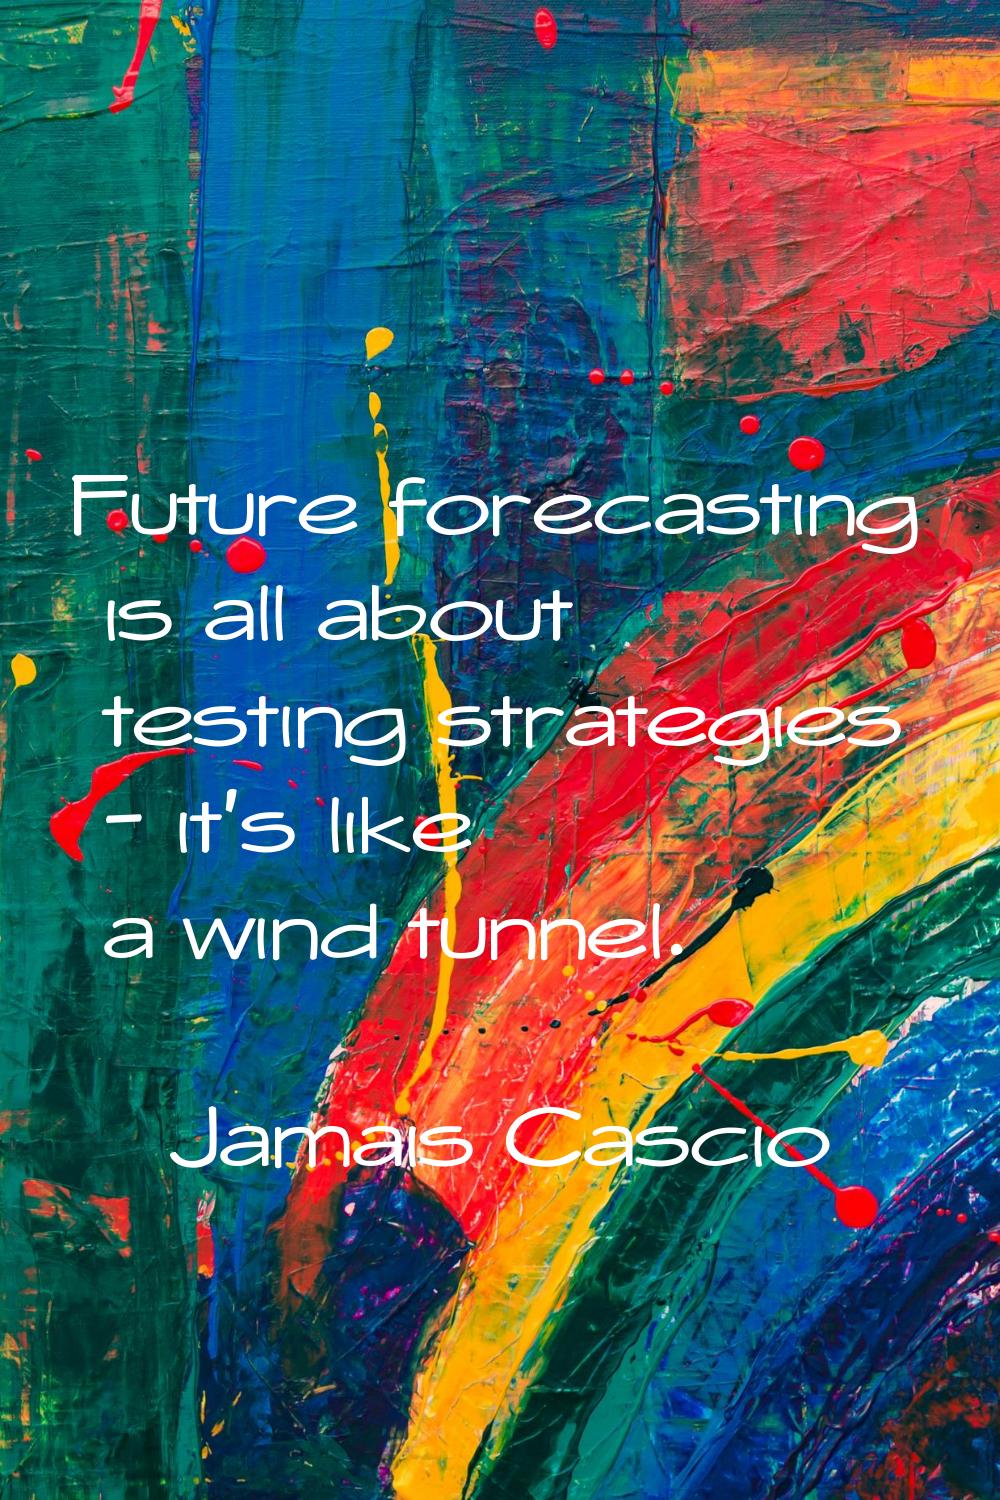 Future forecasting is all about testing strategies - it's like a wind tunnel.